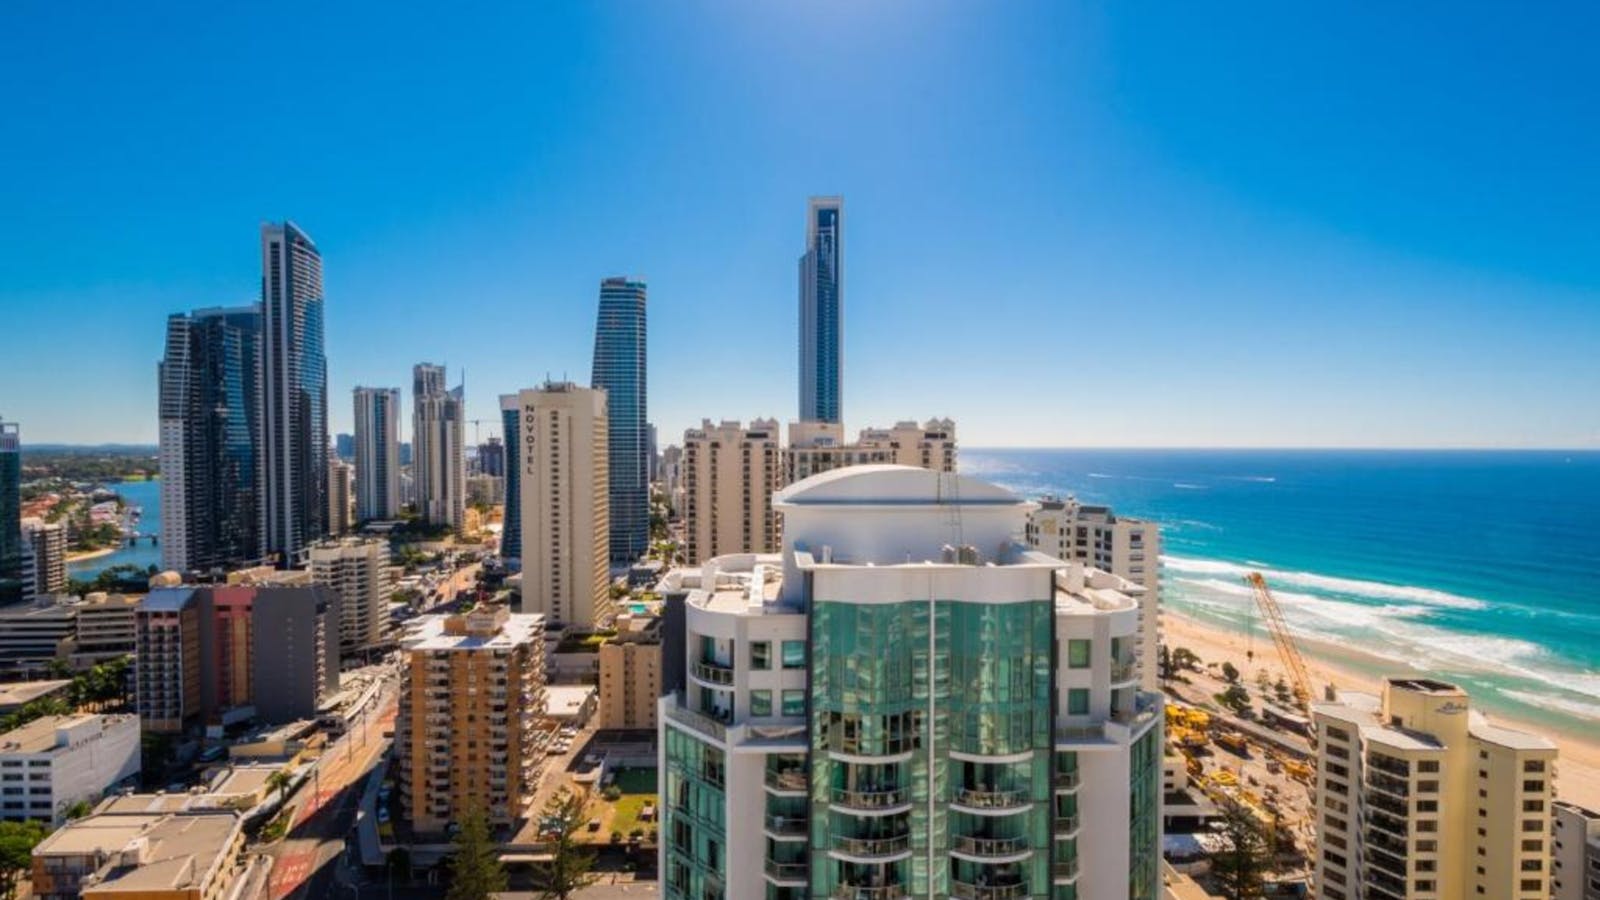 Aegean Apartments Surfers Paradise Queensland lets go on A Gold Coast Holiday